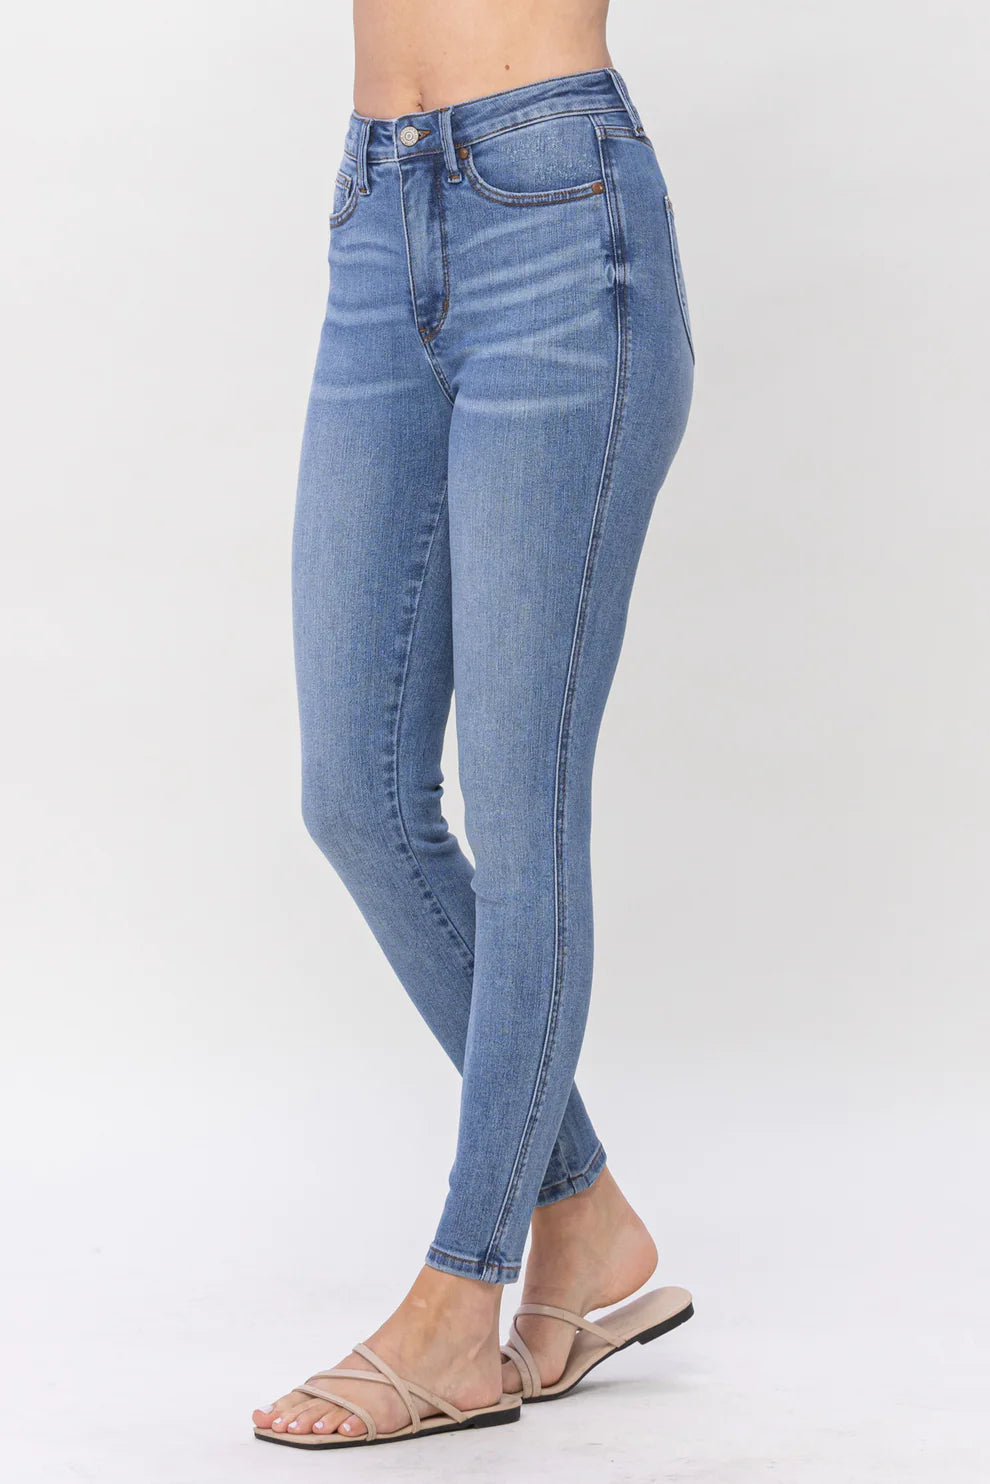 Love To Watch You Leave Tummy Control Butt Sculpting Judy Blue Jeans -  Allure Clothing Boutique